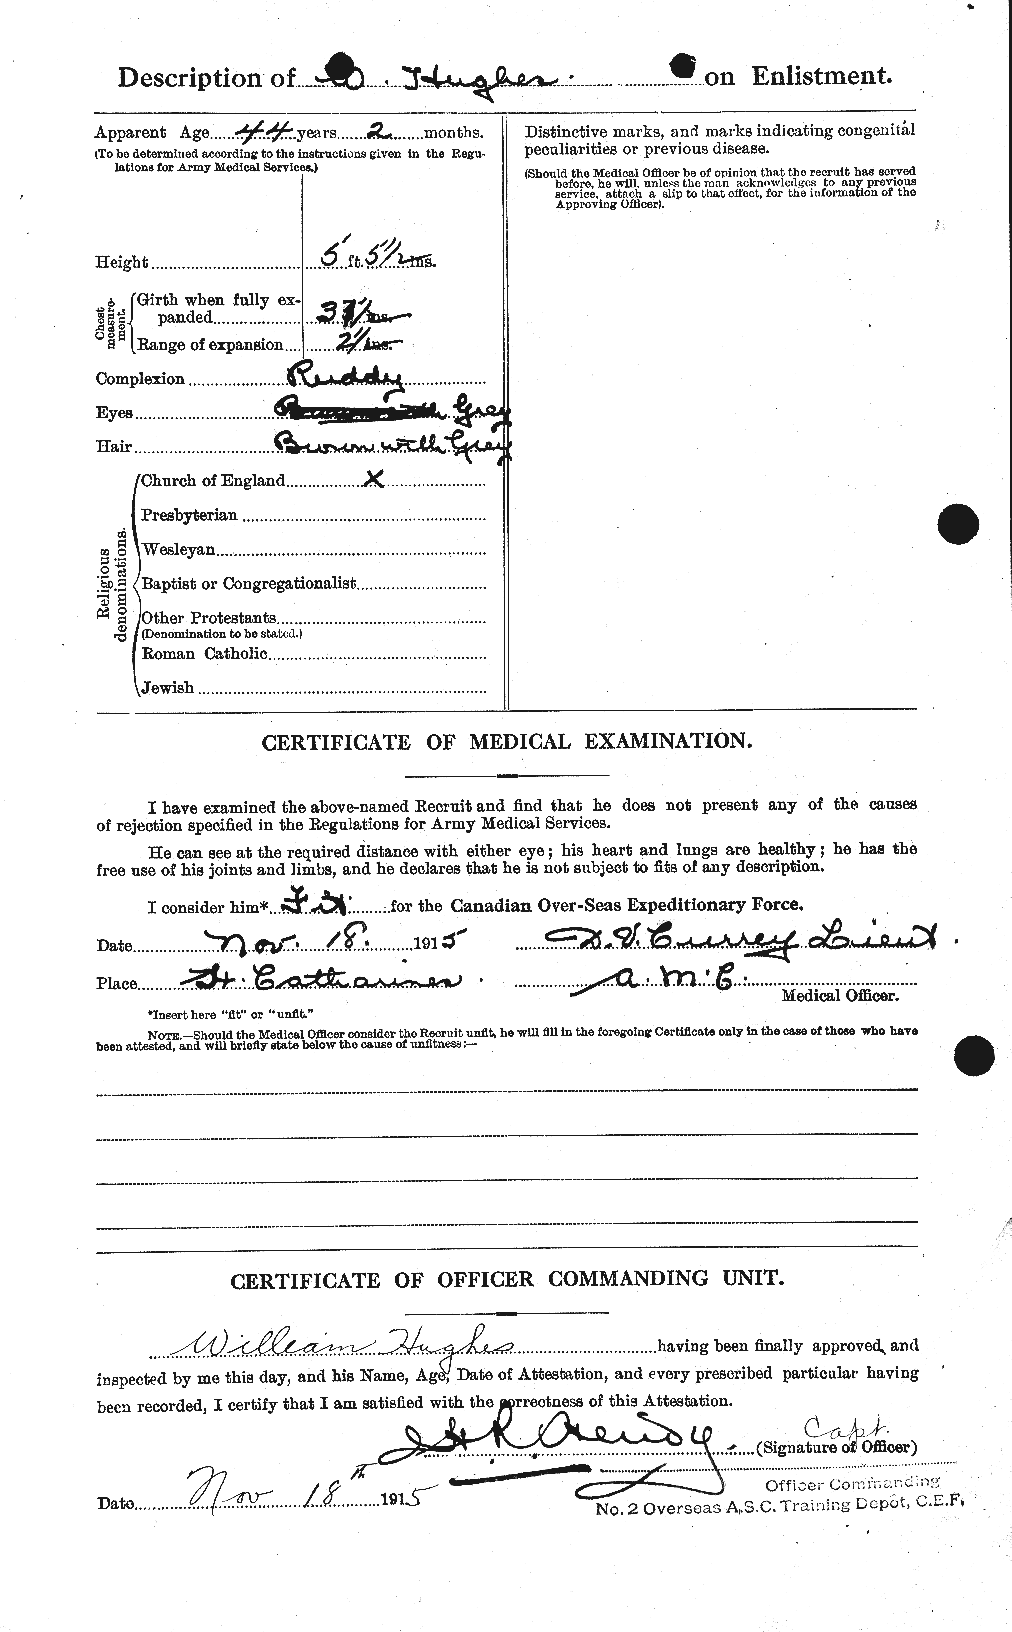 Personnel Records of the First World War - CEF 405885b